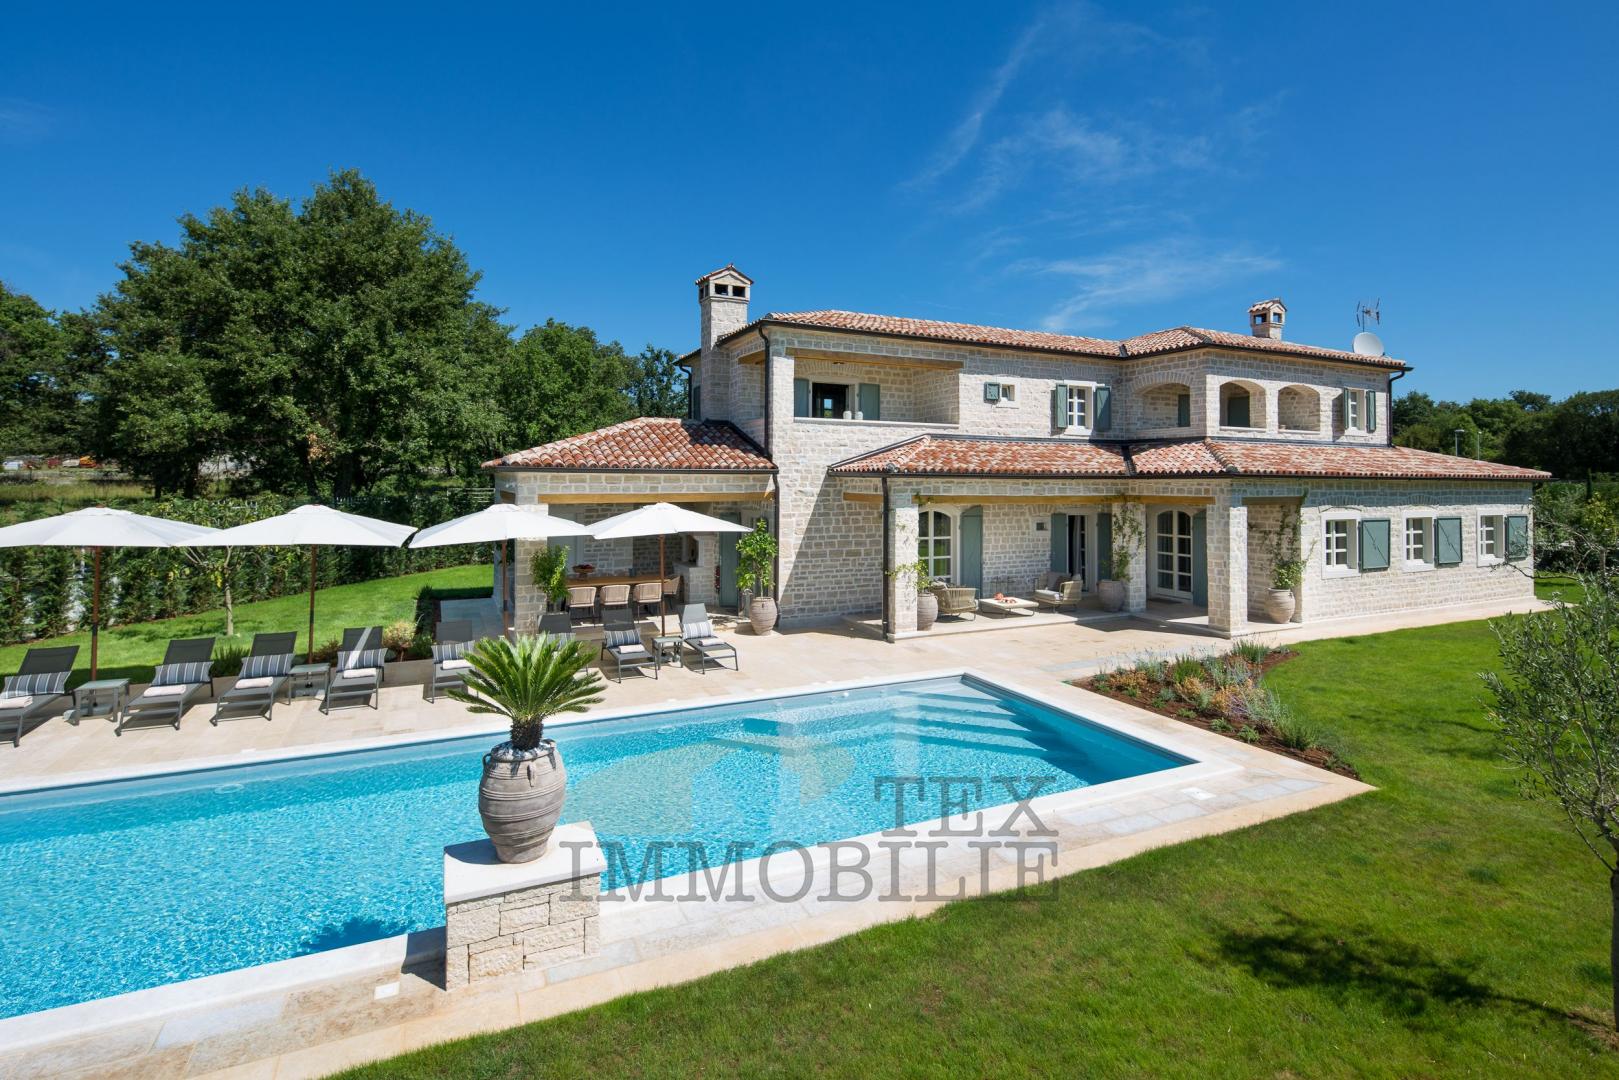 An exclusive country villa with swimming pool and sports facilities